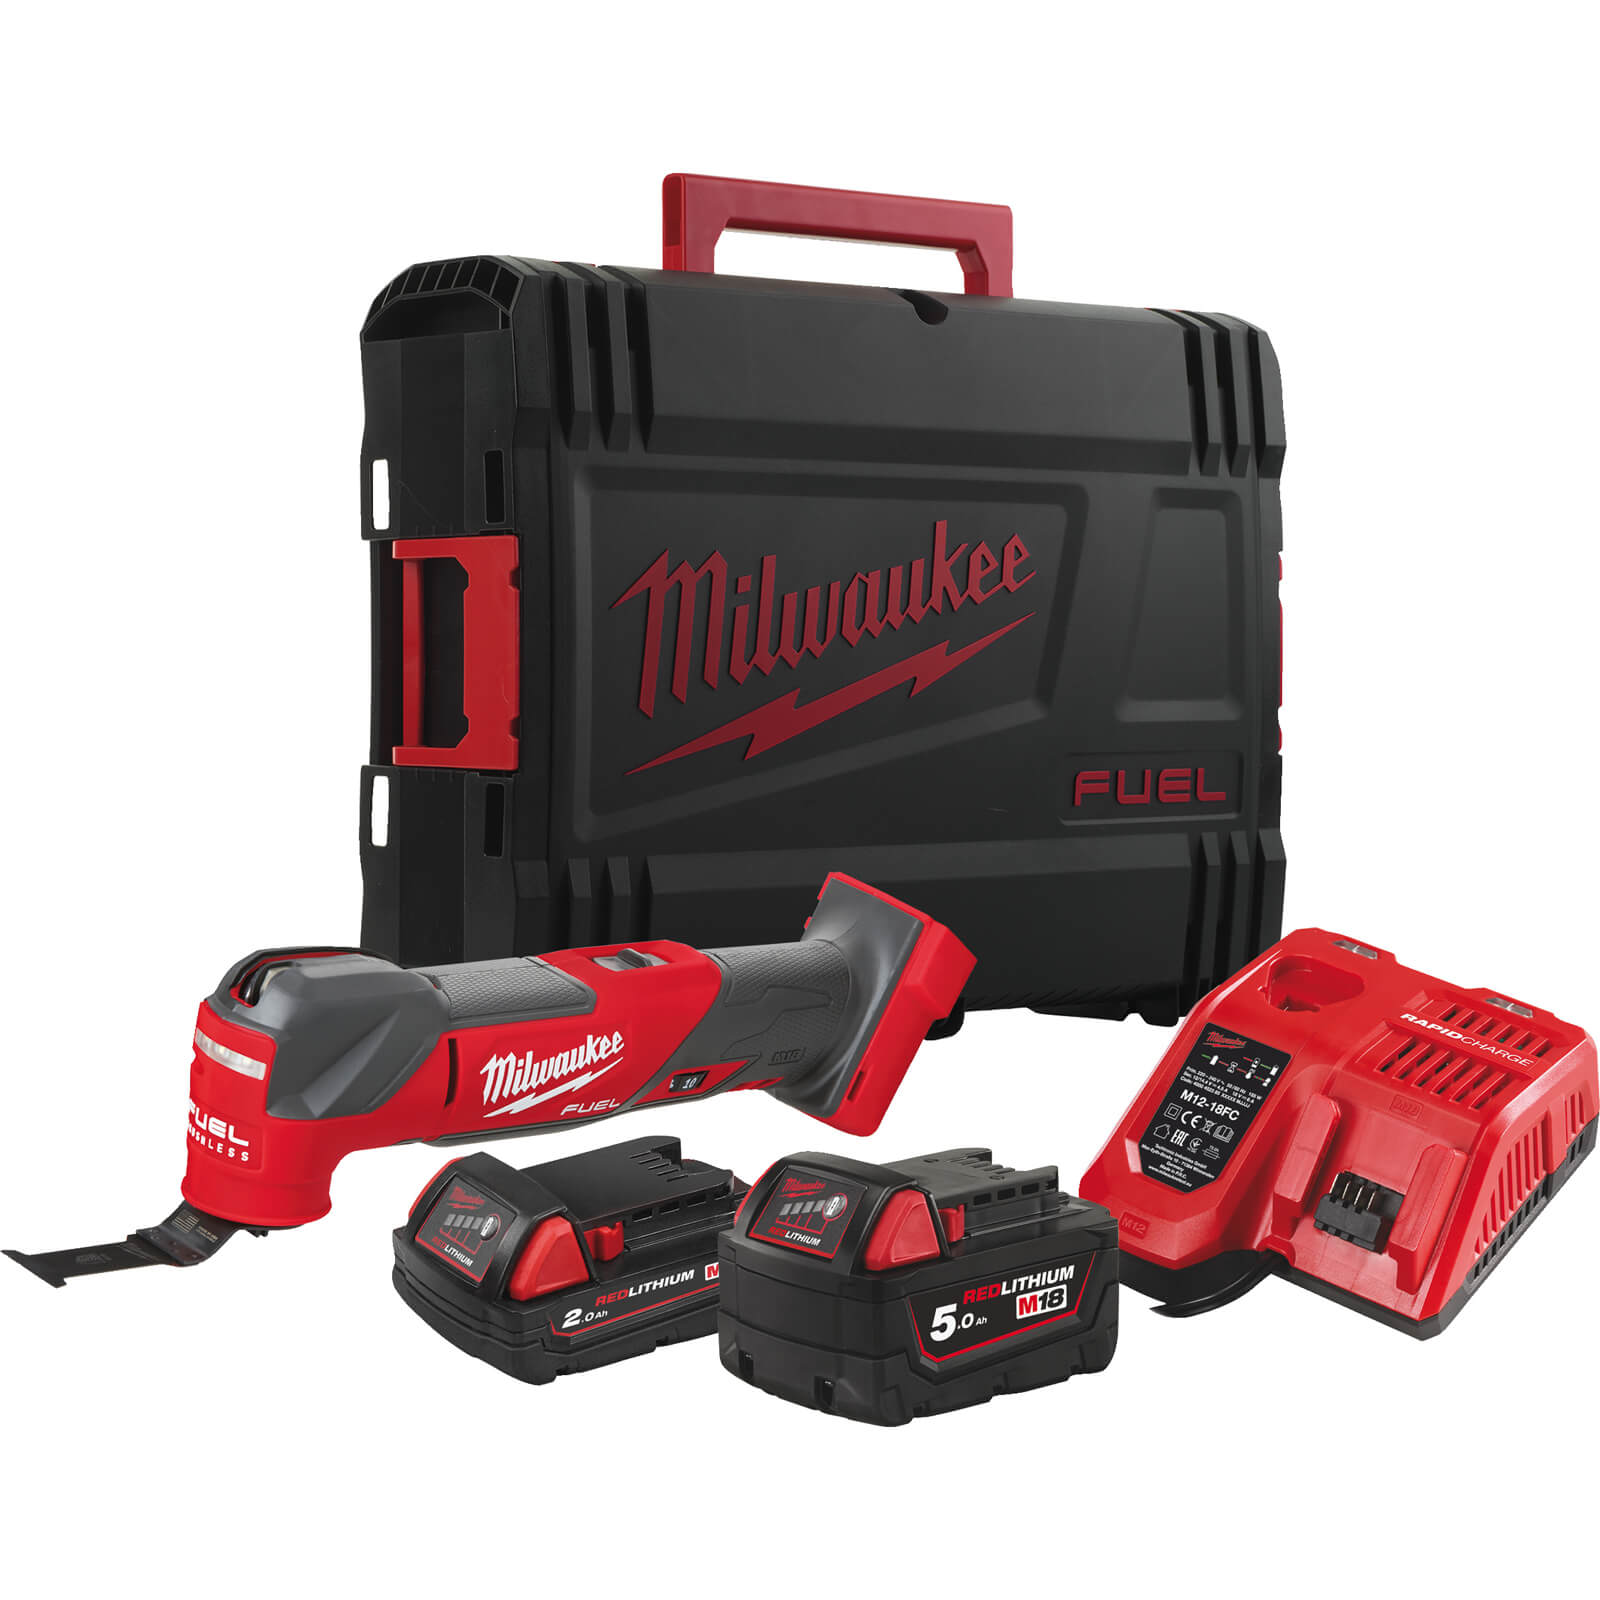 Image of Milwaukee M18 FMT Fuel 18v Cordless Brushless Oscillating Multi Tool 1 X 2ah & 1 x 5ah Li-ion Charger Case